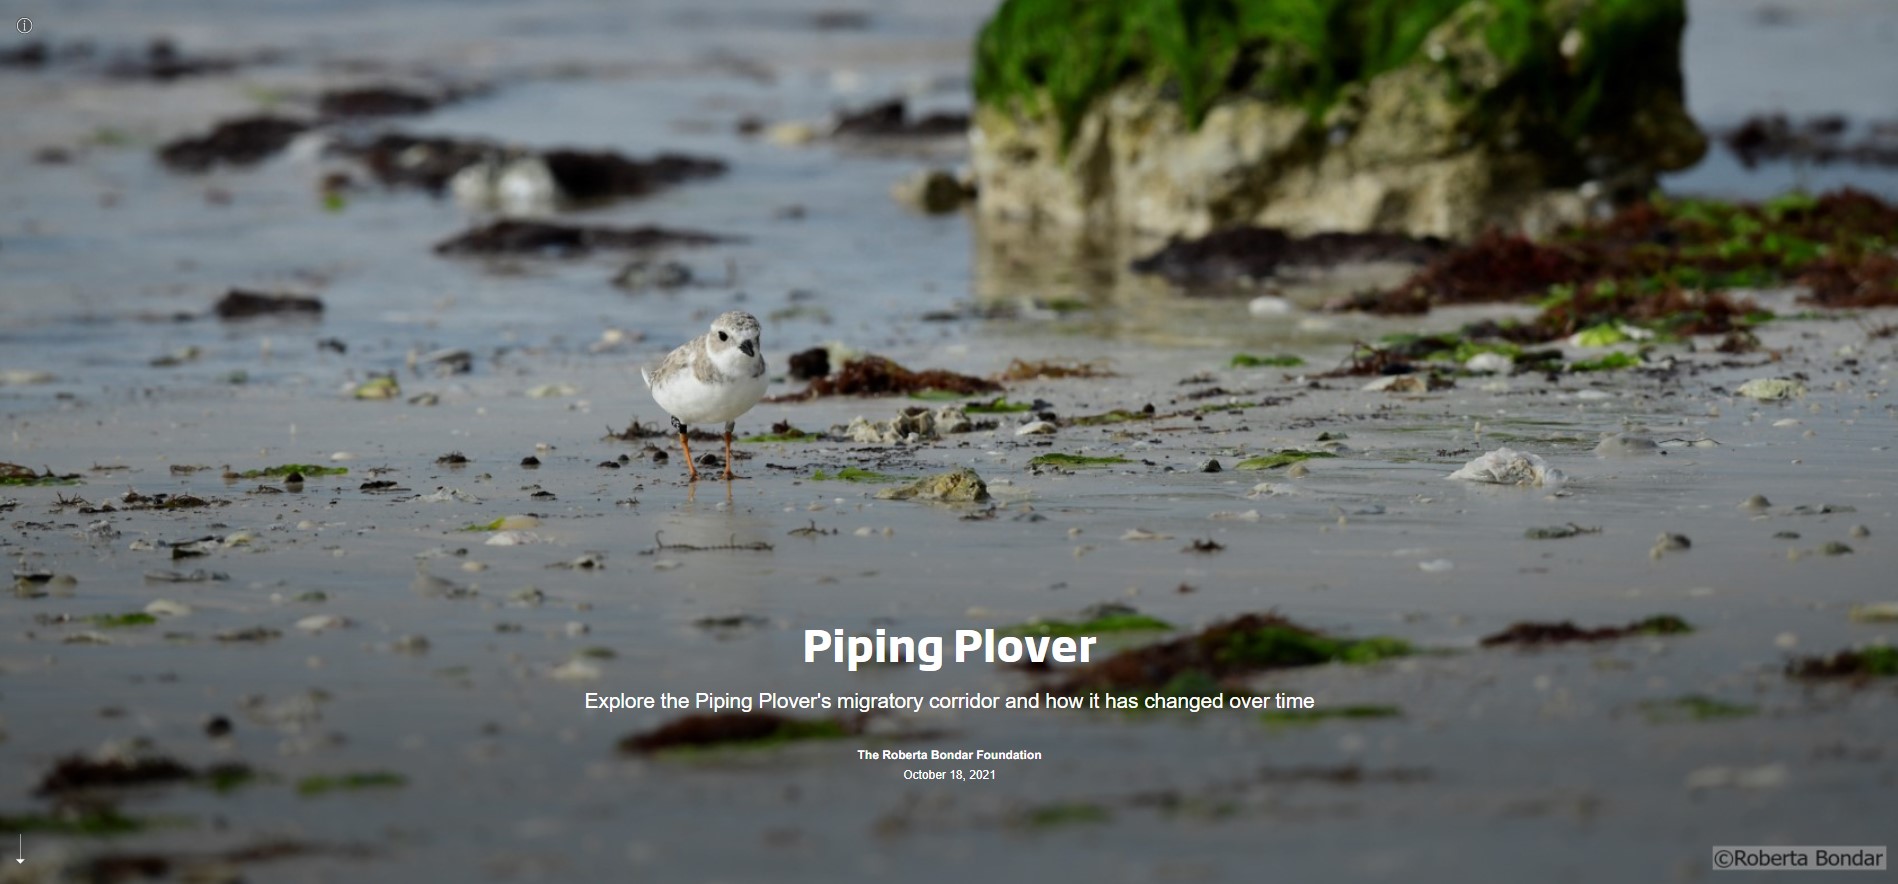 Slide with the text Piping Plover and an image of a small bird walking on a sand and rock beach